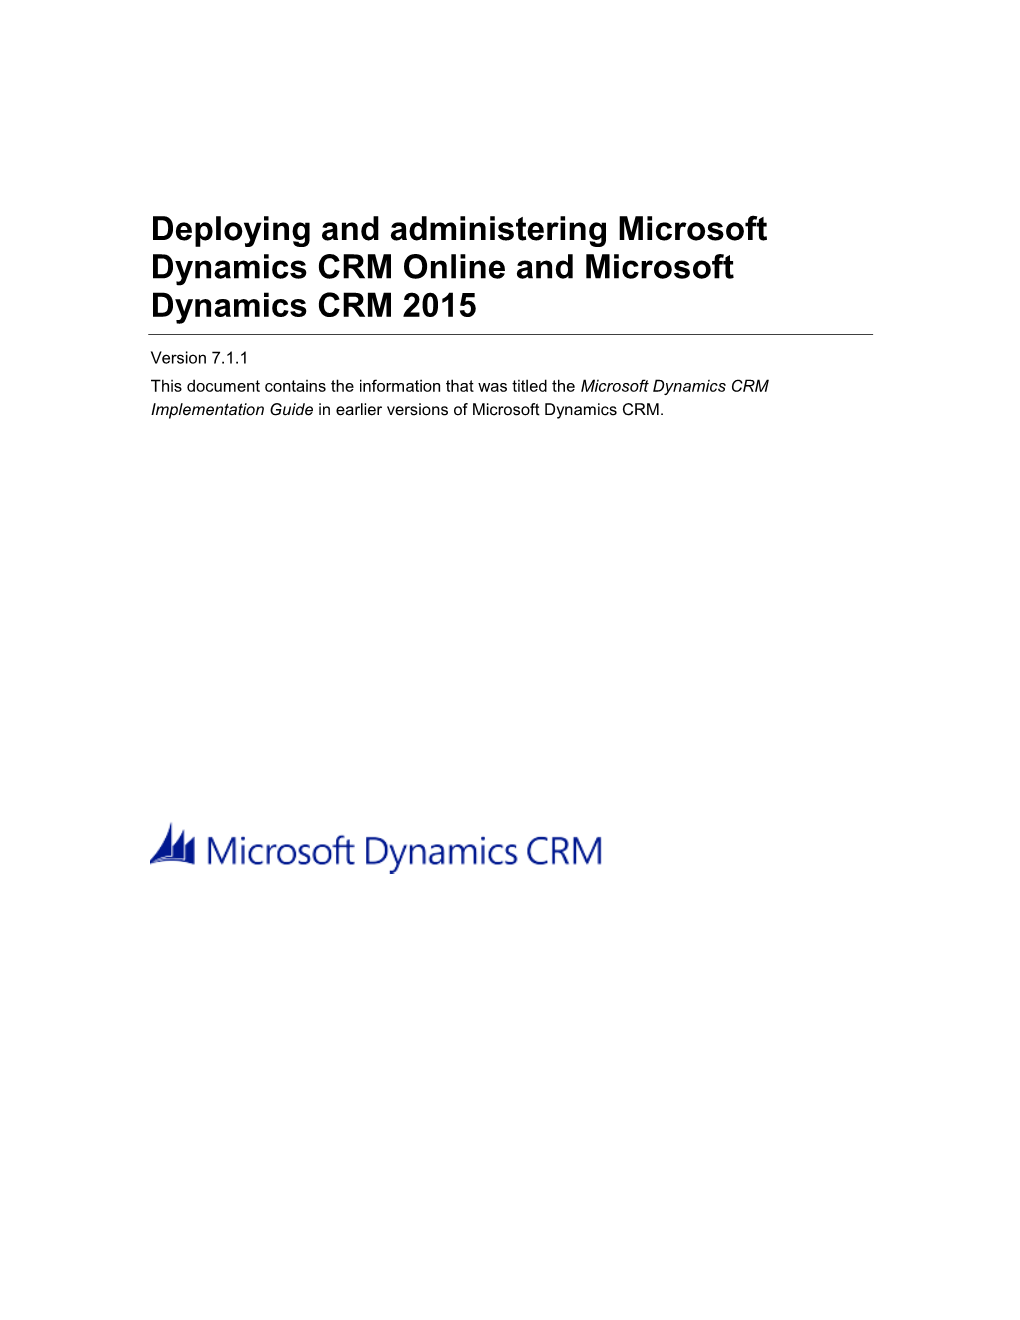 Deploying and Administering Microsoft Dynamics CRM Online and Microsoft Dynamics CRM 2015